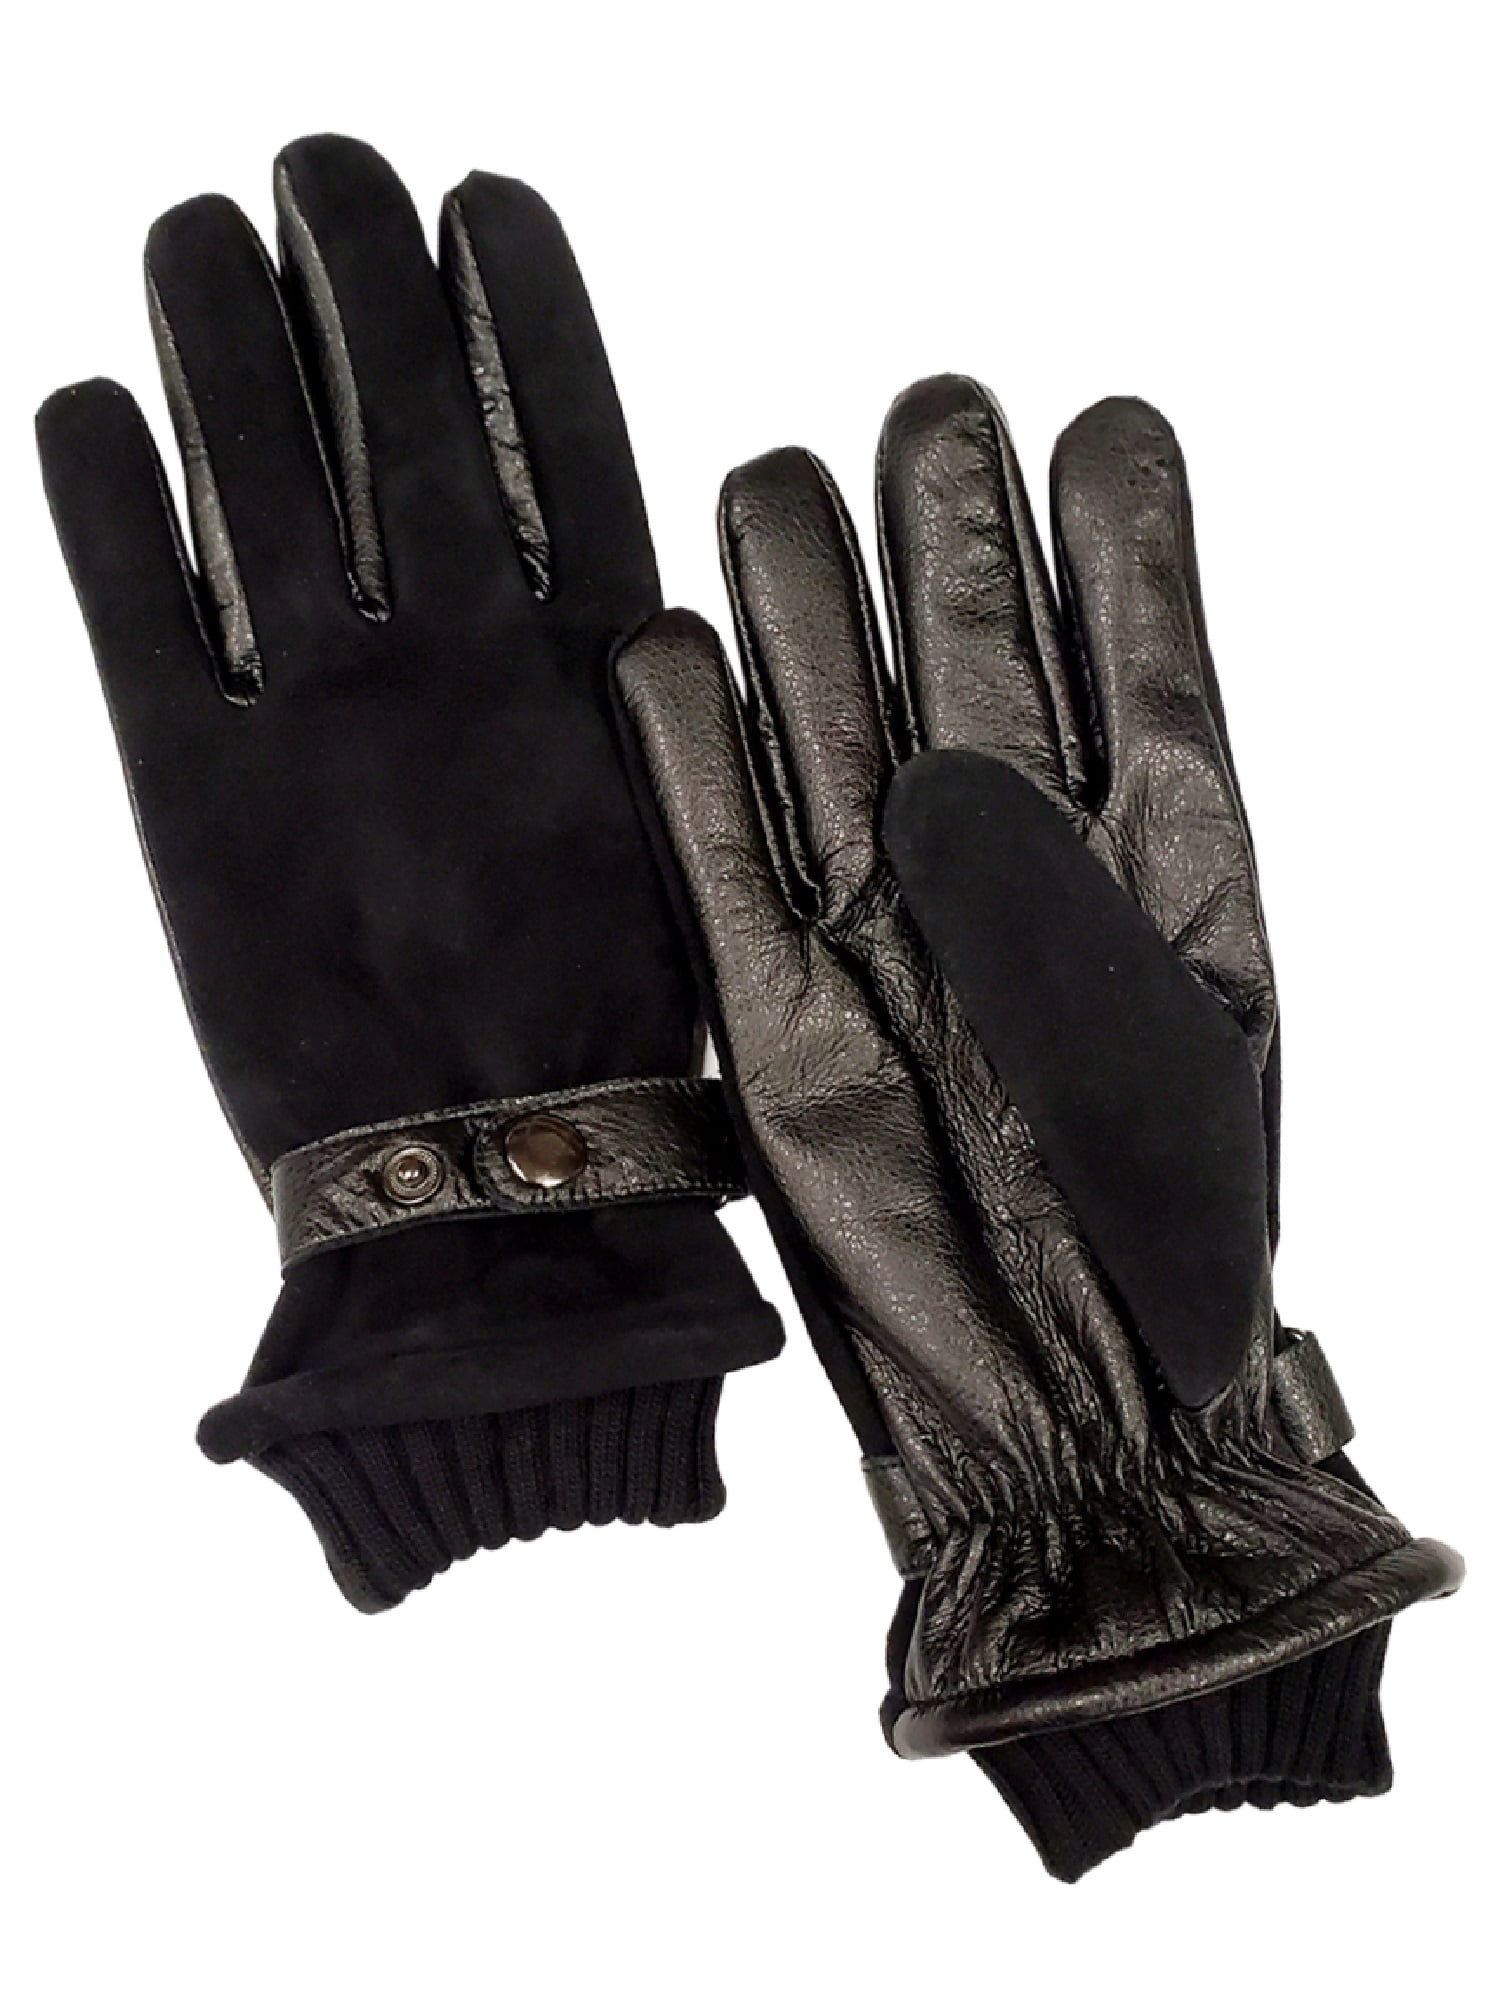 Mens Quality Soft Real Dark Brown Leather Everyday Driving Gloves Fully Lined 